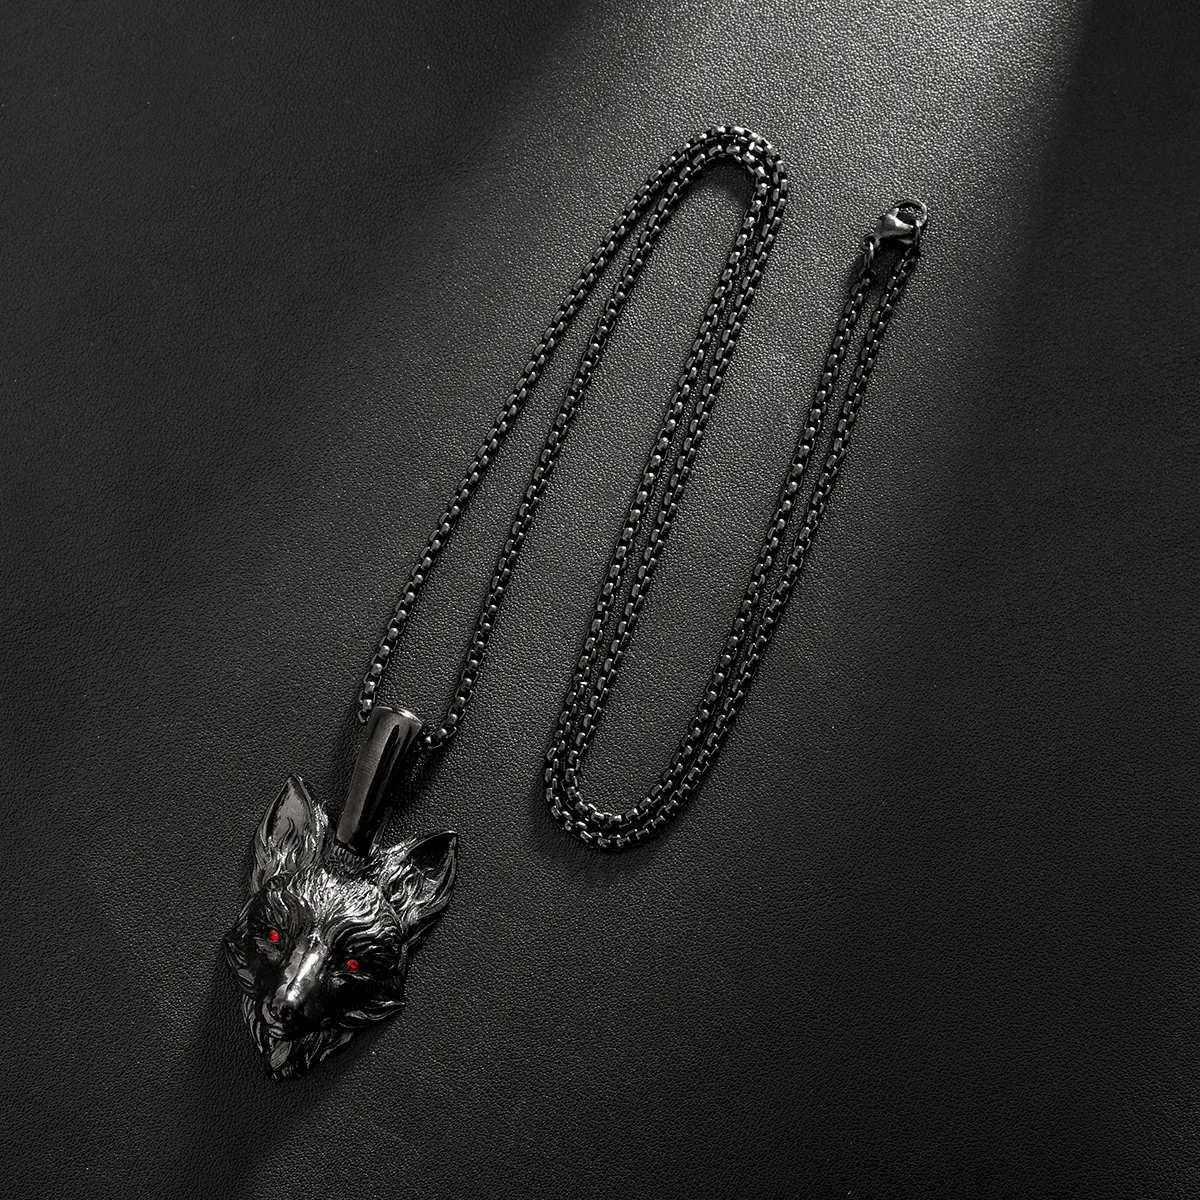 Hot Sale Cool Black Necklace Animal Red Eye Fox Pendant fashion jewelry necklaces for men